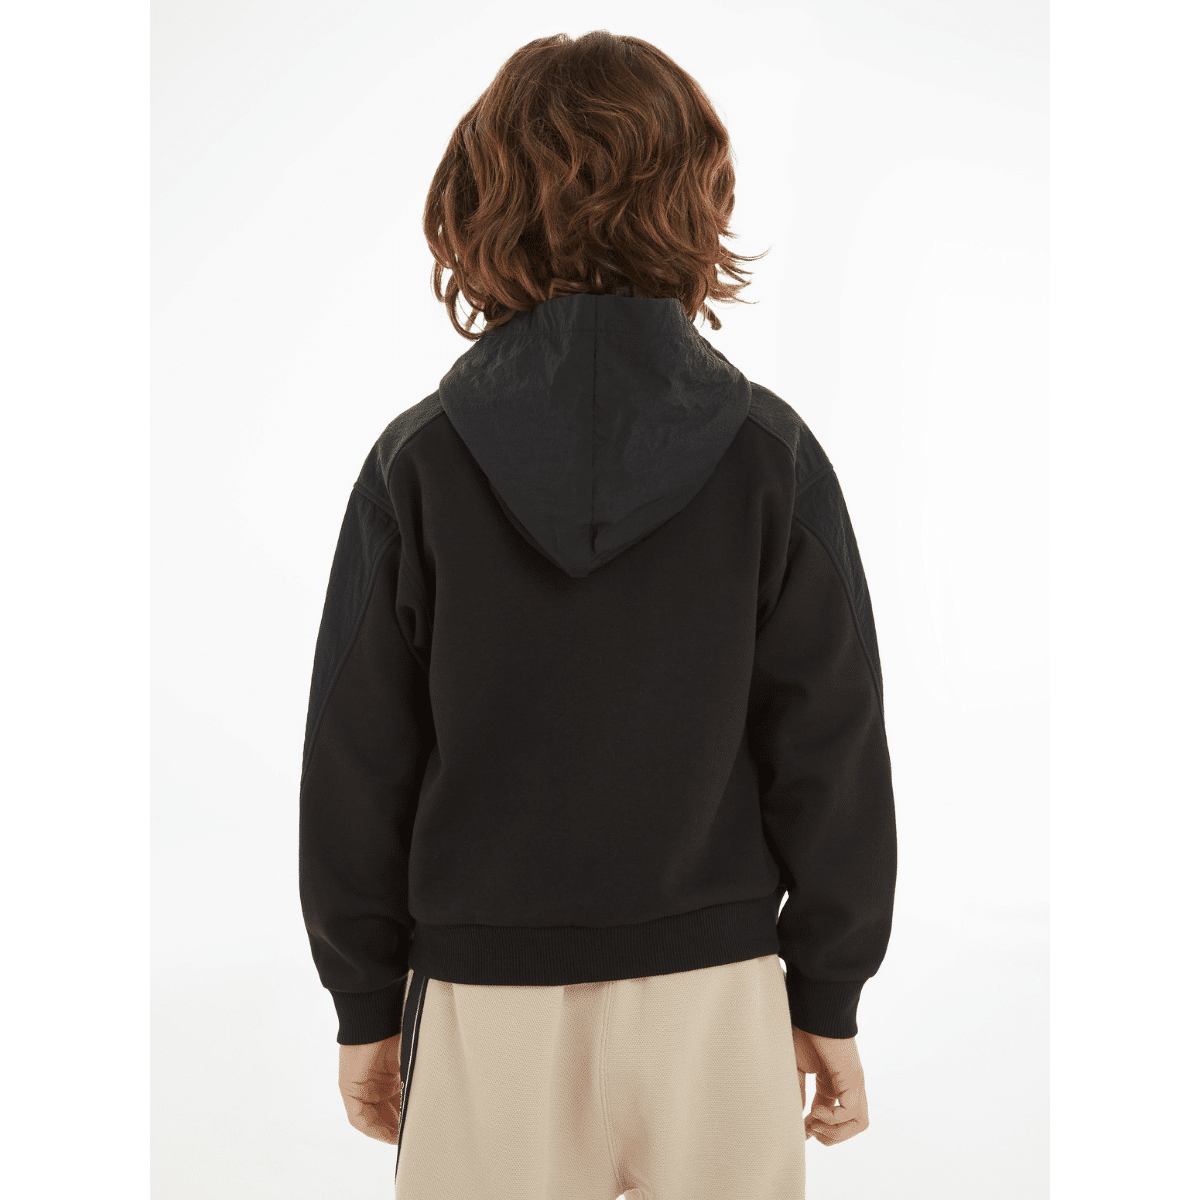 calvin klein unisex childrens black hoodie with white logo back view on model